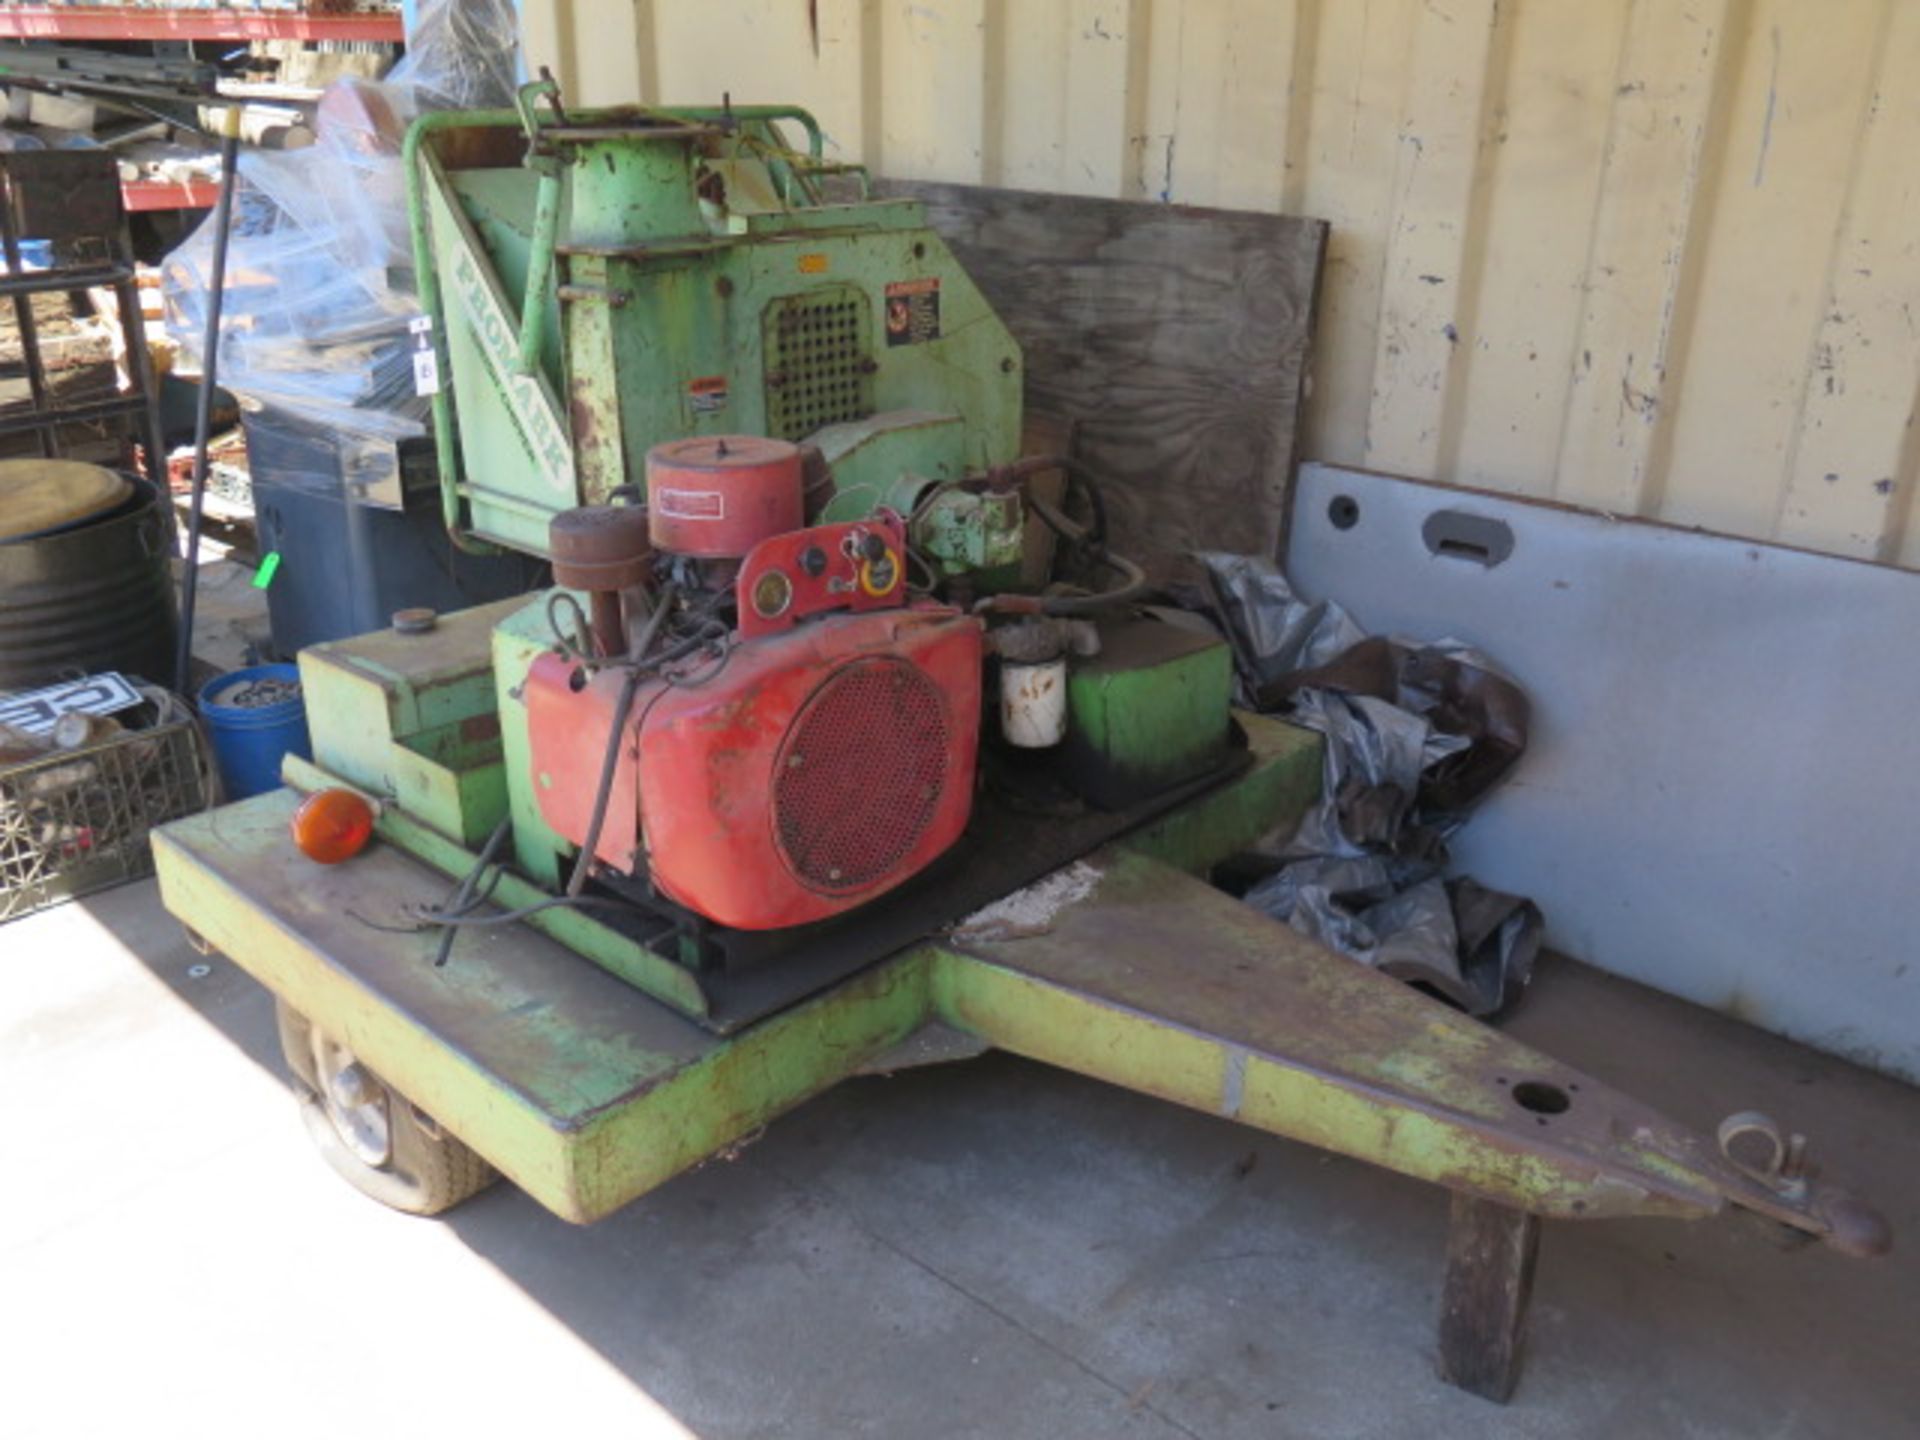 Towable Promark Brush Chipper w/ Kohler Gas Engine (NEEDS DISCHARGE CHUTE) (SOLD AS-IS – NO WARR